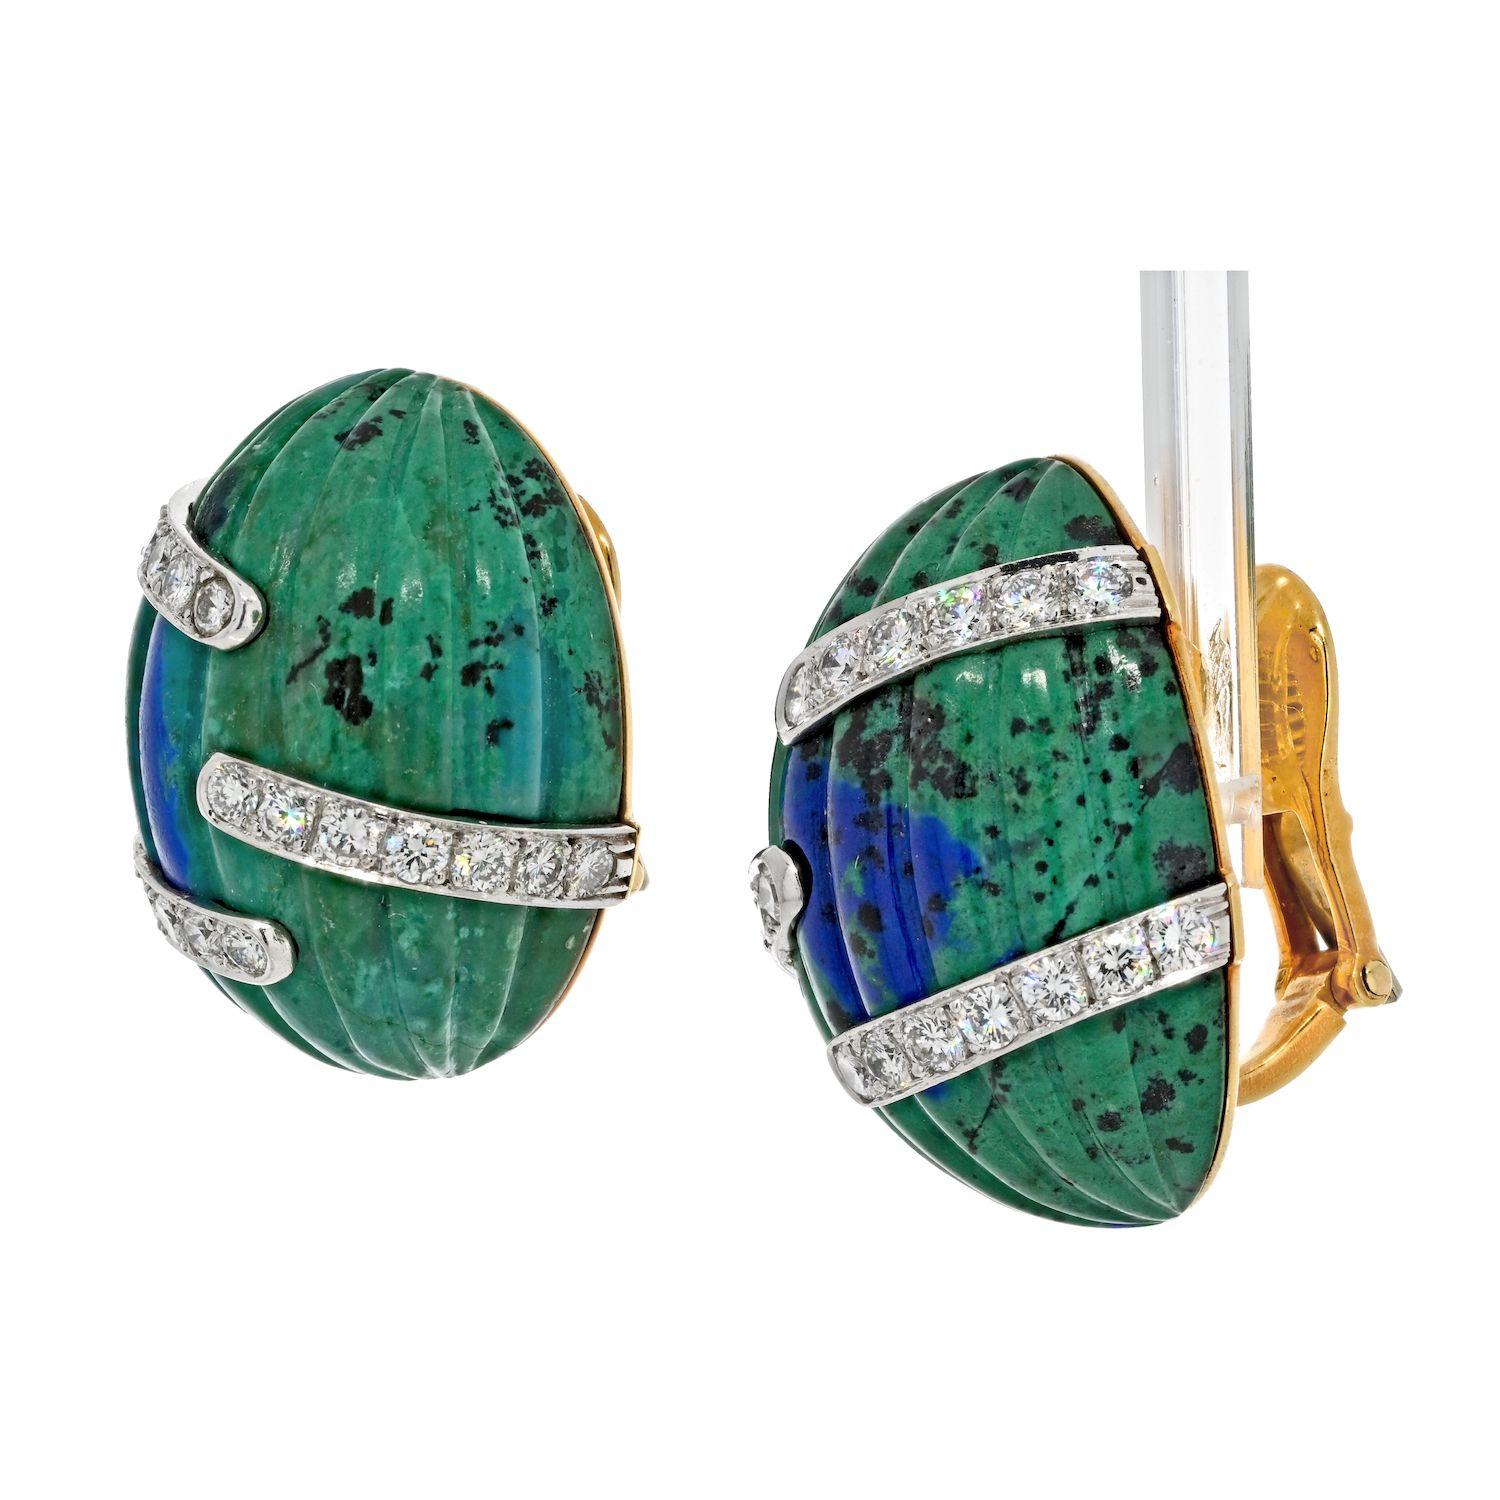 Lovely egg shaped David Webb Platinum & 18K Yellow Gold Azurmalachite And Diamond Bombe Fluted Clip Earrings.
Signed 'Webb, 18k'; containing 40 full cut diamonds [F-G/VS] weighing approximately 2.00 carats total 45.9 grams approximately 36.00 mm